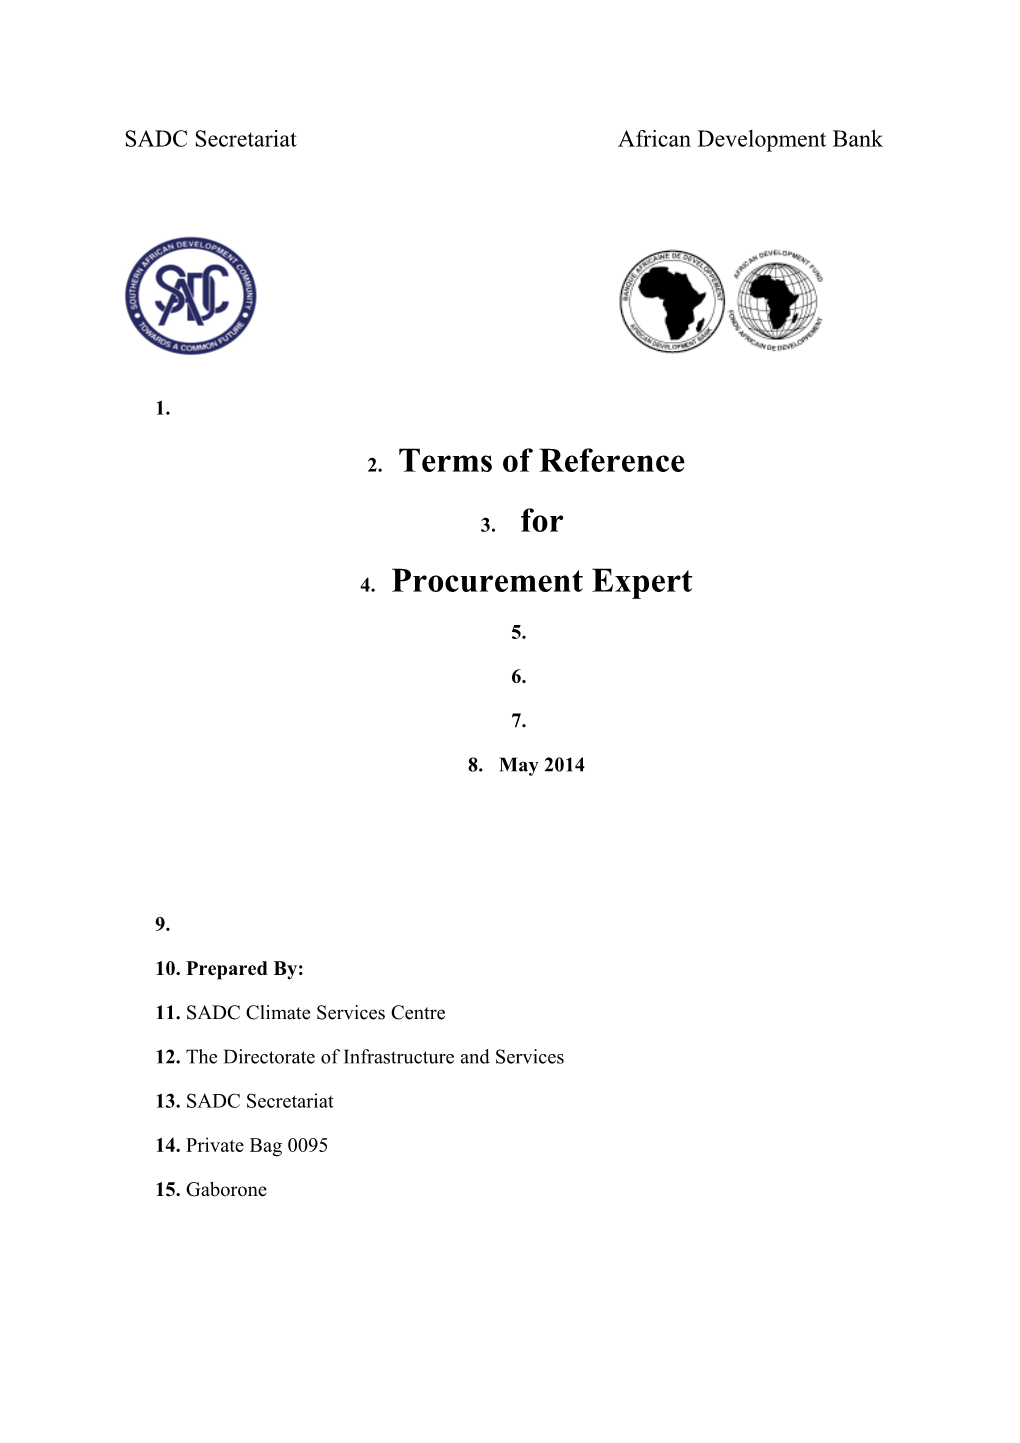 TERMS of REFERENCE for TECHNICAL ASSISTANCE: PROCUREMENT EXPERT - SADC/Afdb ACMAD DMC/CLIMATE